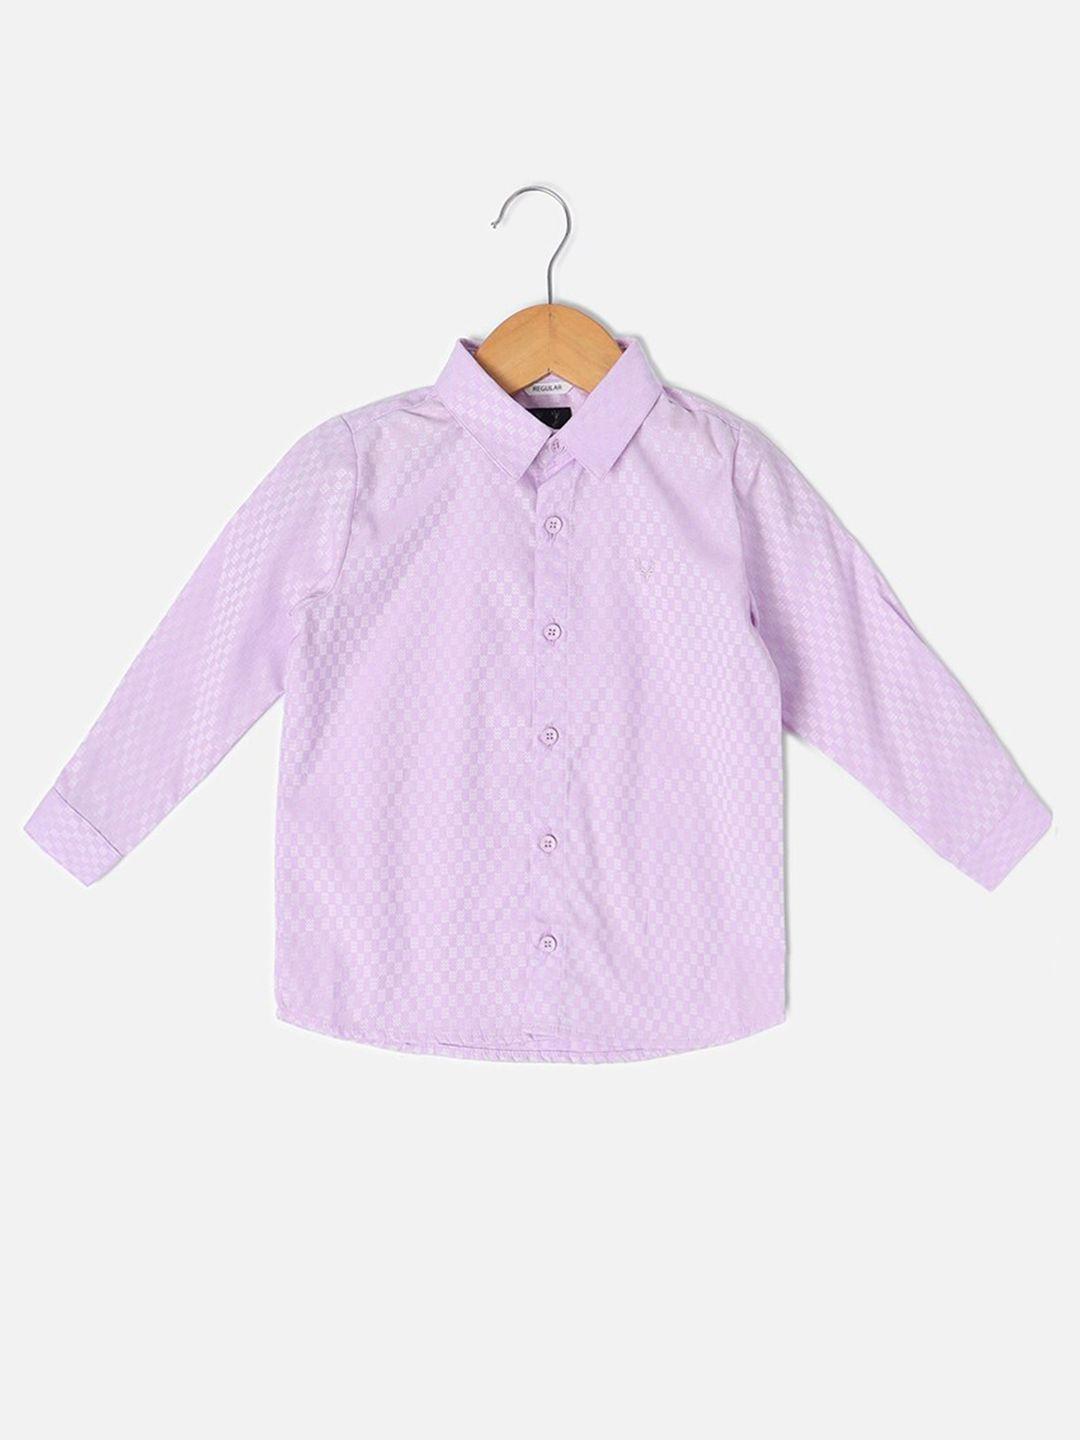 allen solly junior infant boys micro ditsy printed pure cotton casual shirt